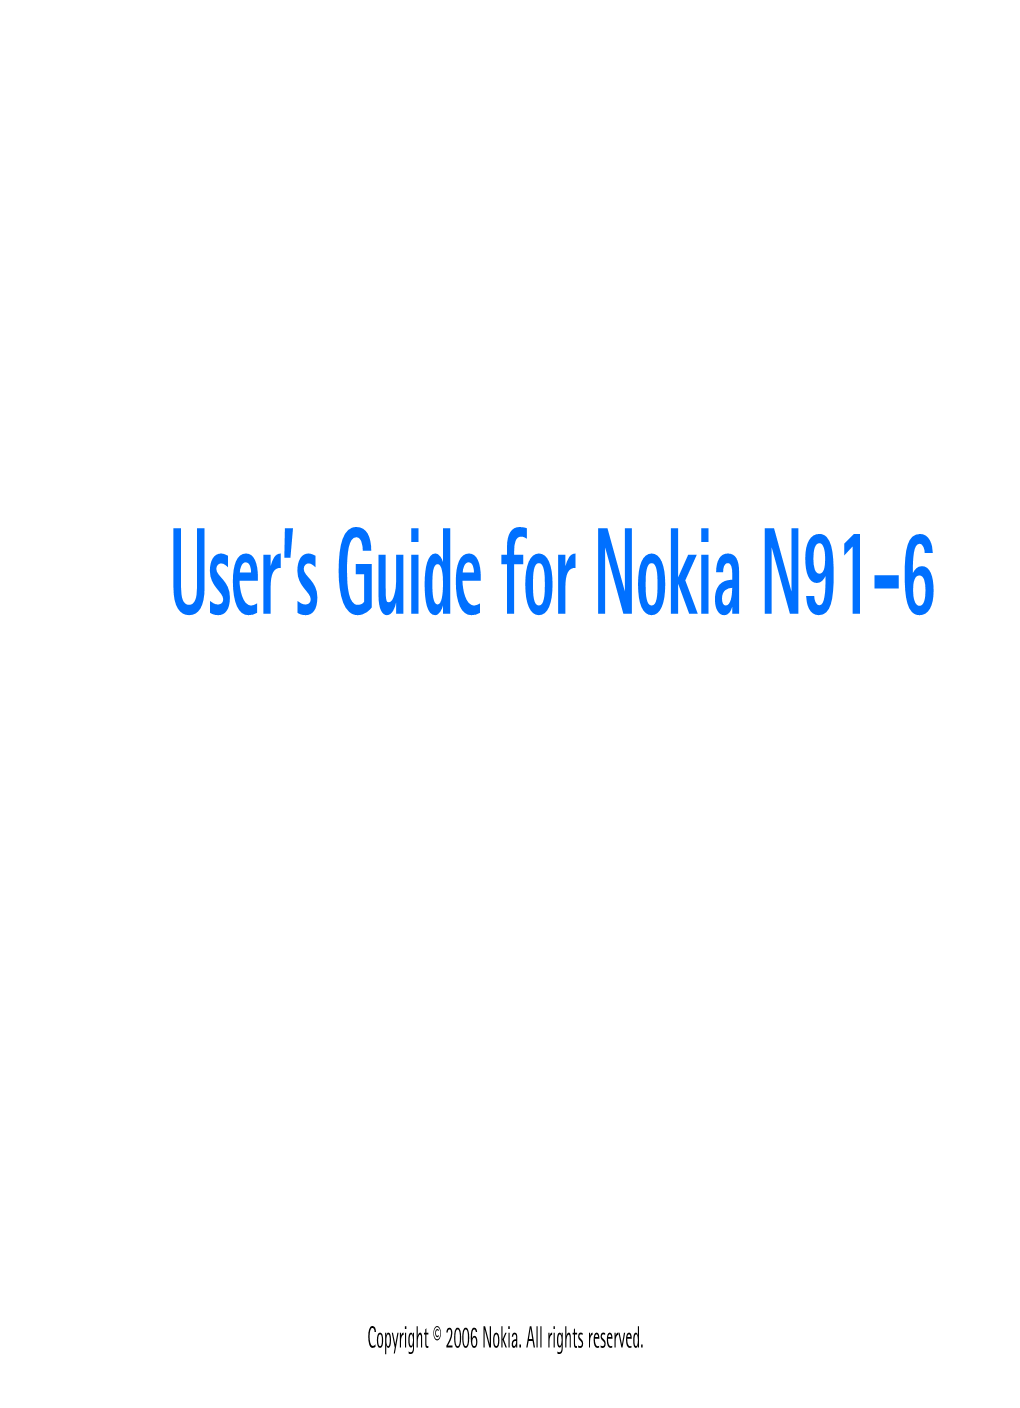 User's Guide for Nokia N91-6